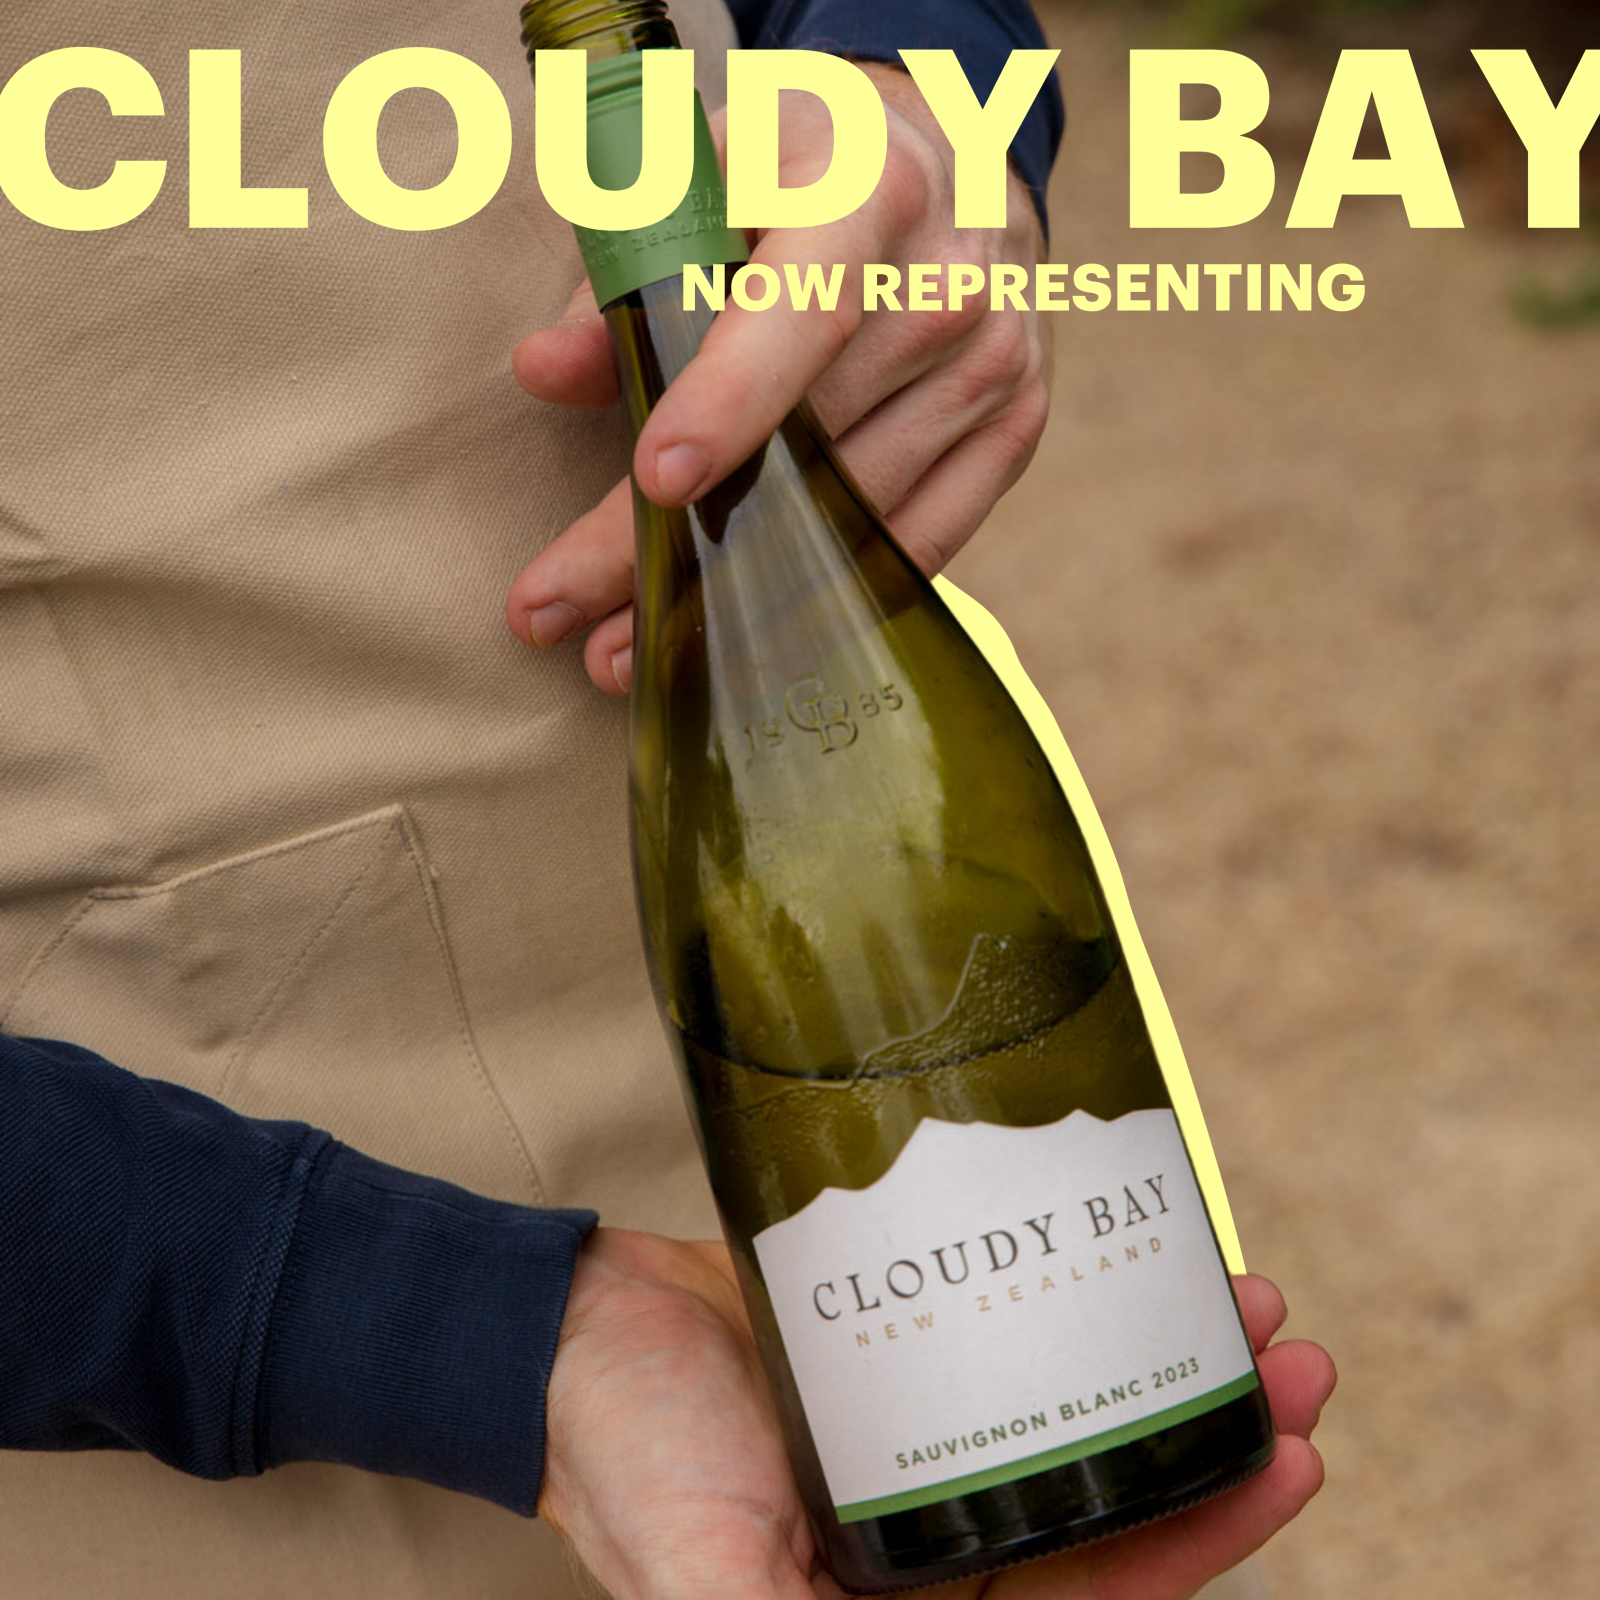 Now Representing: CLOUDY BAY